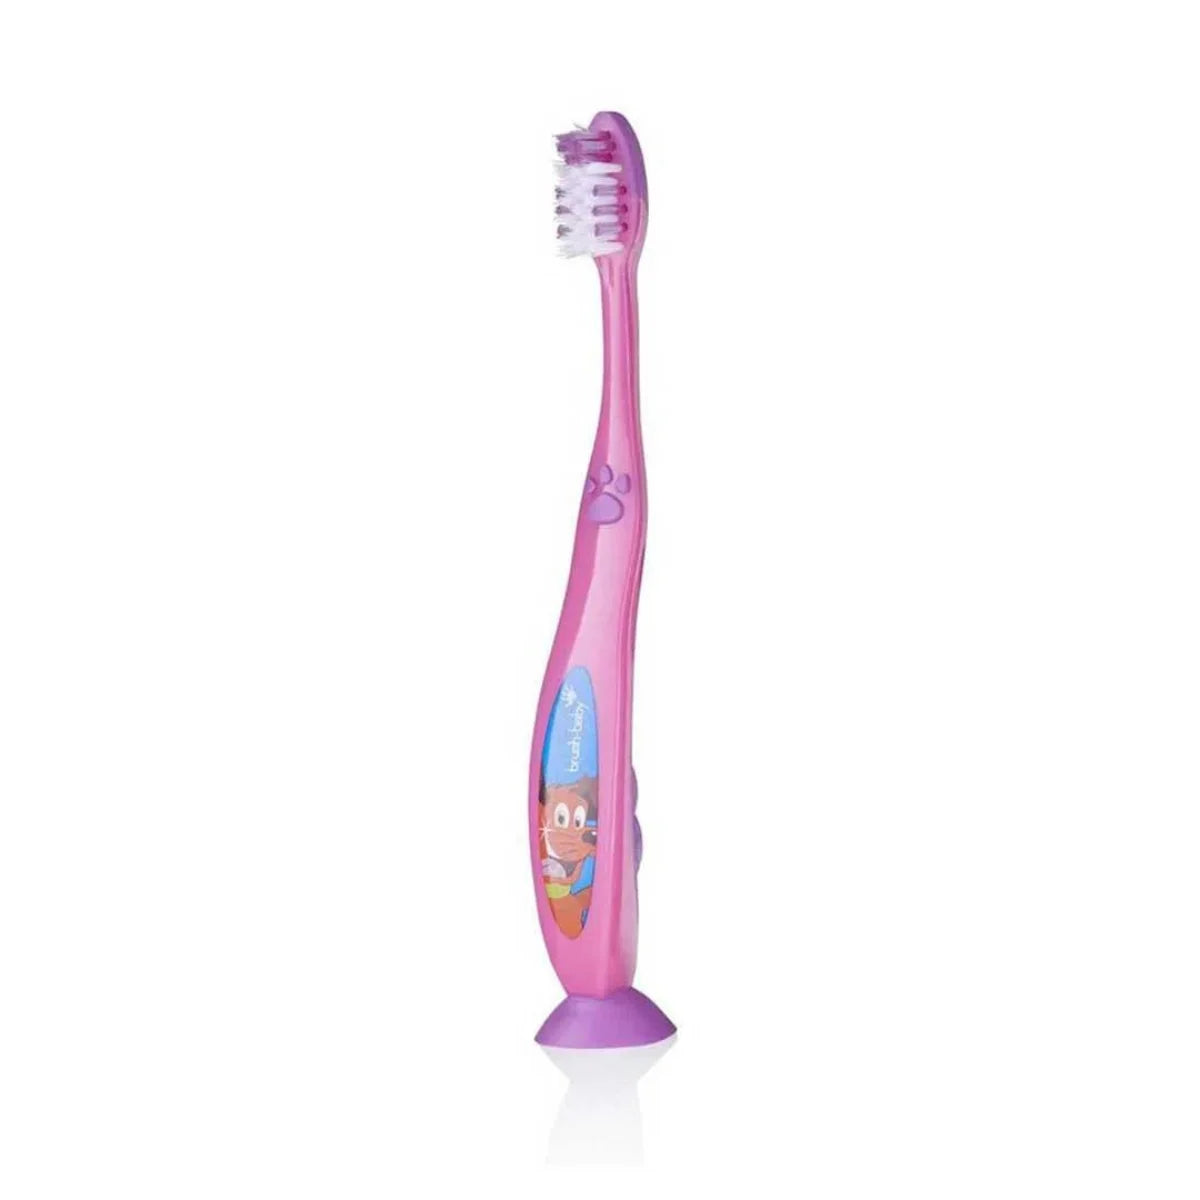 Pink manual floss toothbrush for children 6 years and older with purple time, deep cleaning bristles toothbrush and sucker feet